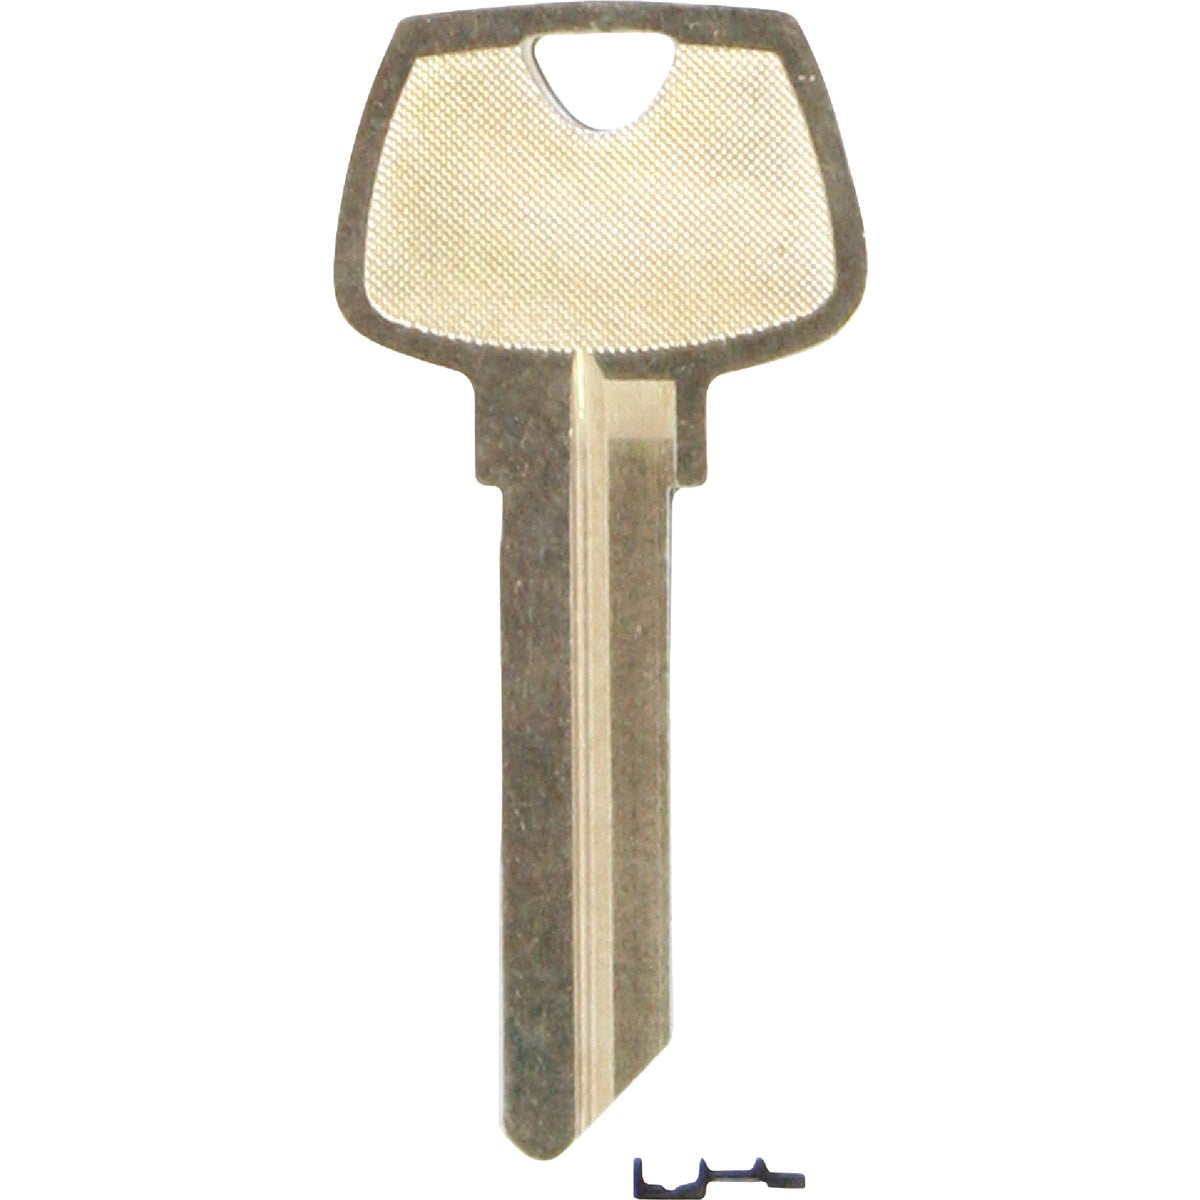 Item 235792, Nickel-plated key blank. When you order one, you will receive 10 keys.